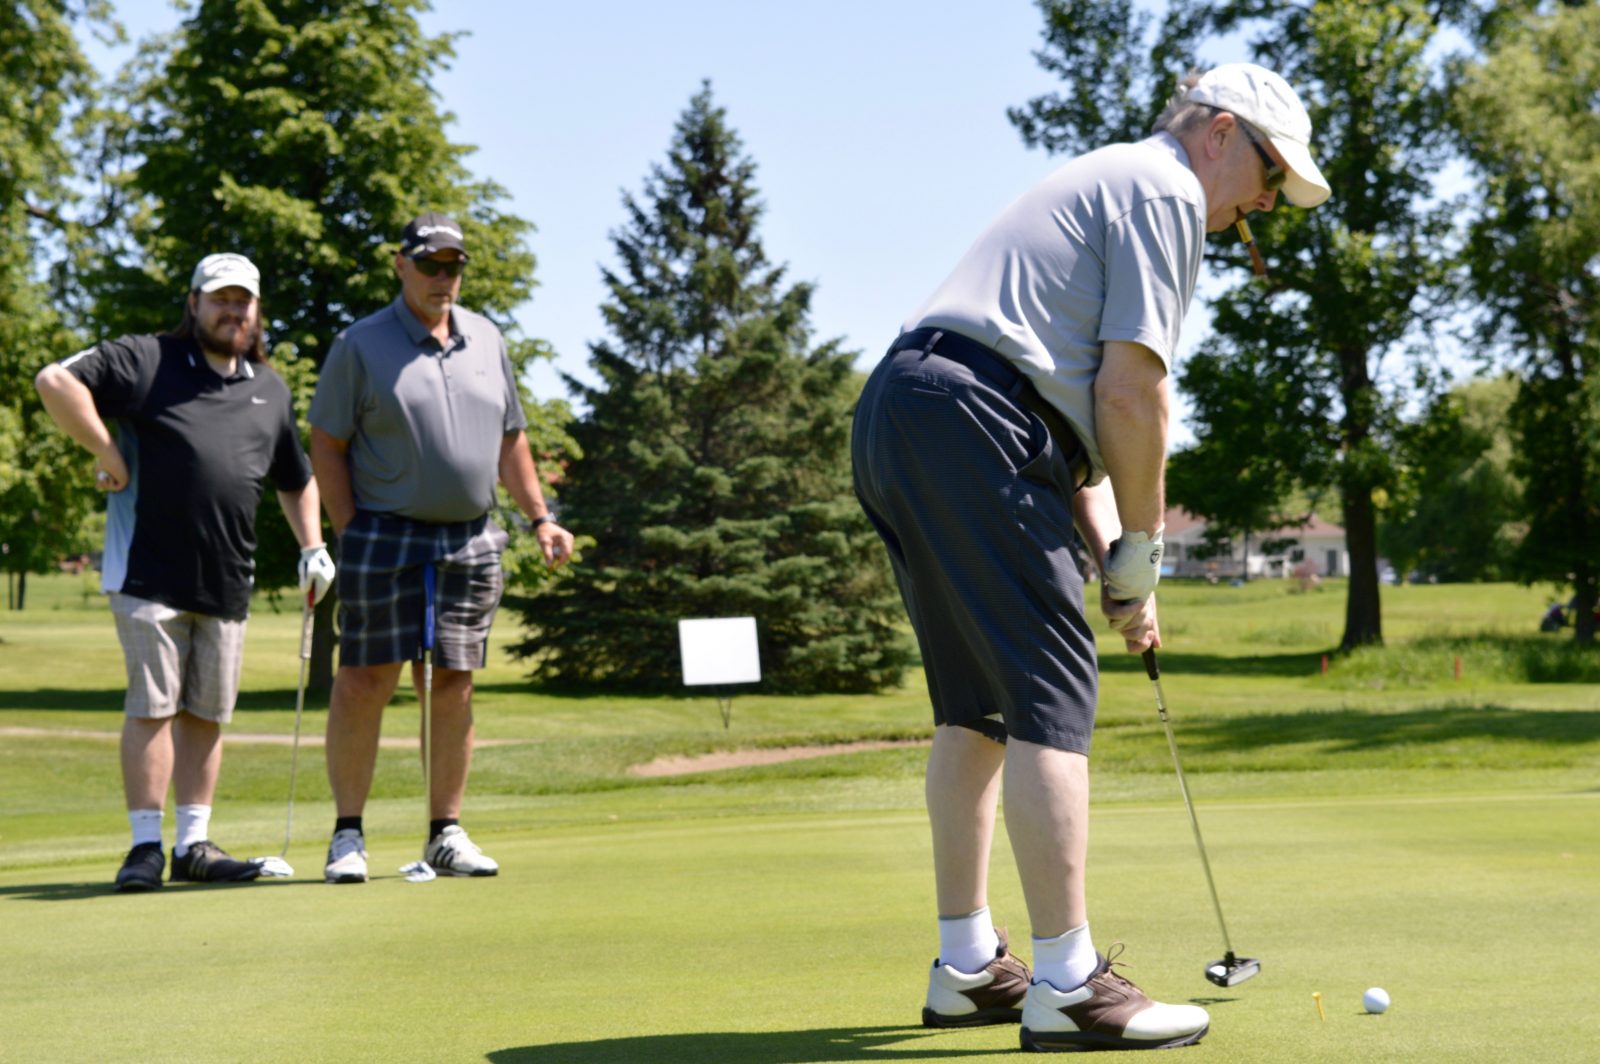 Golfing for Hospice